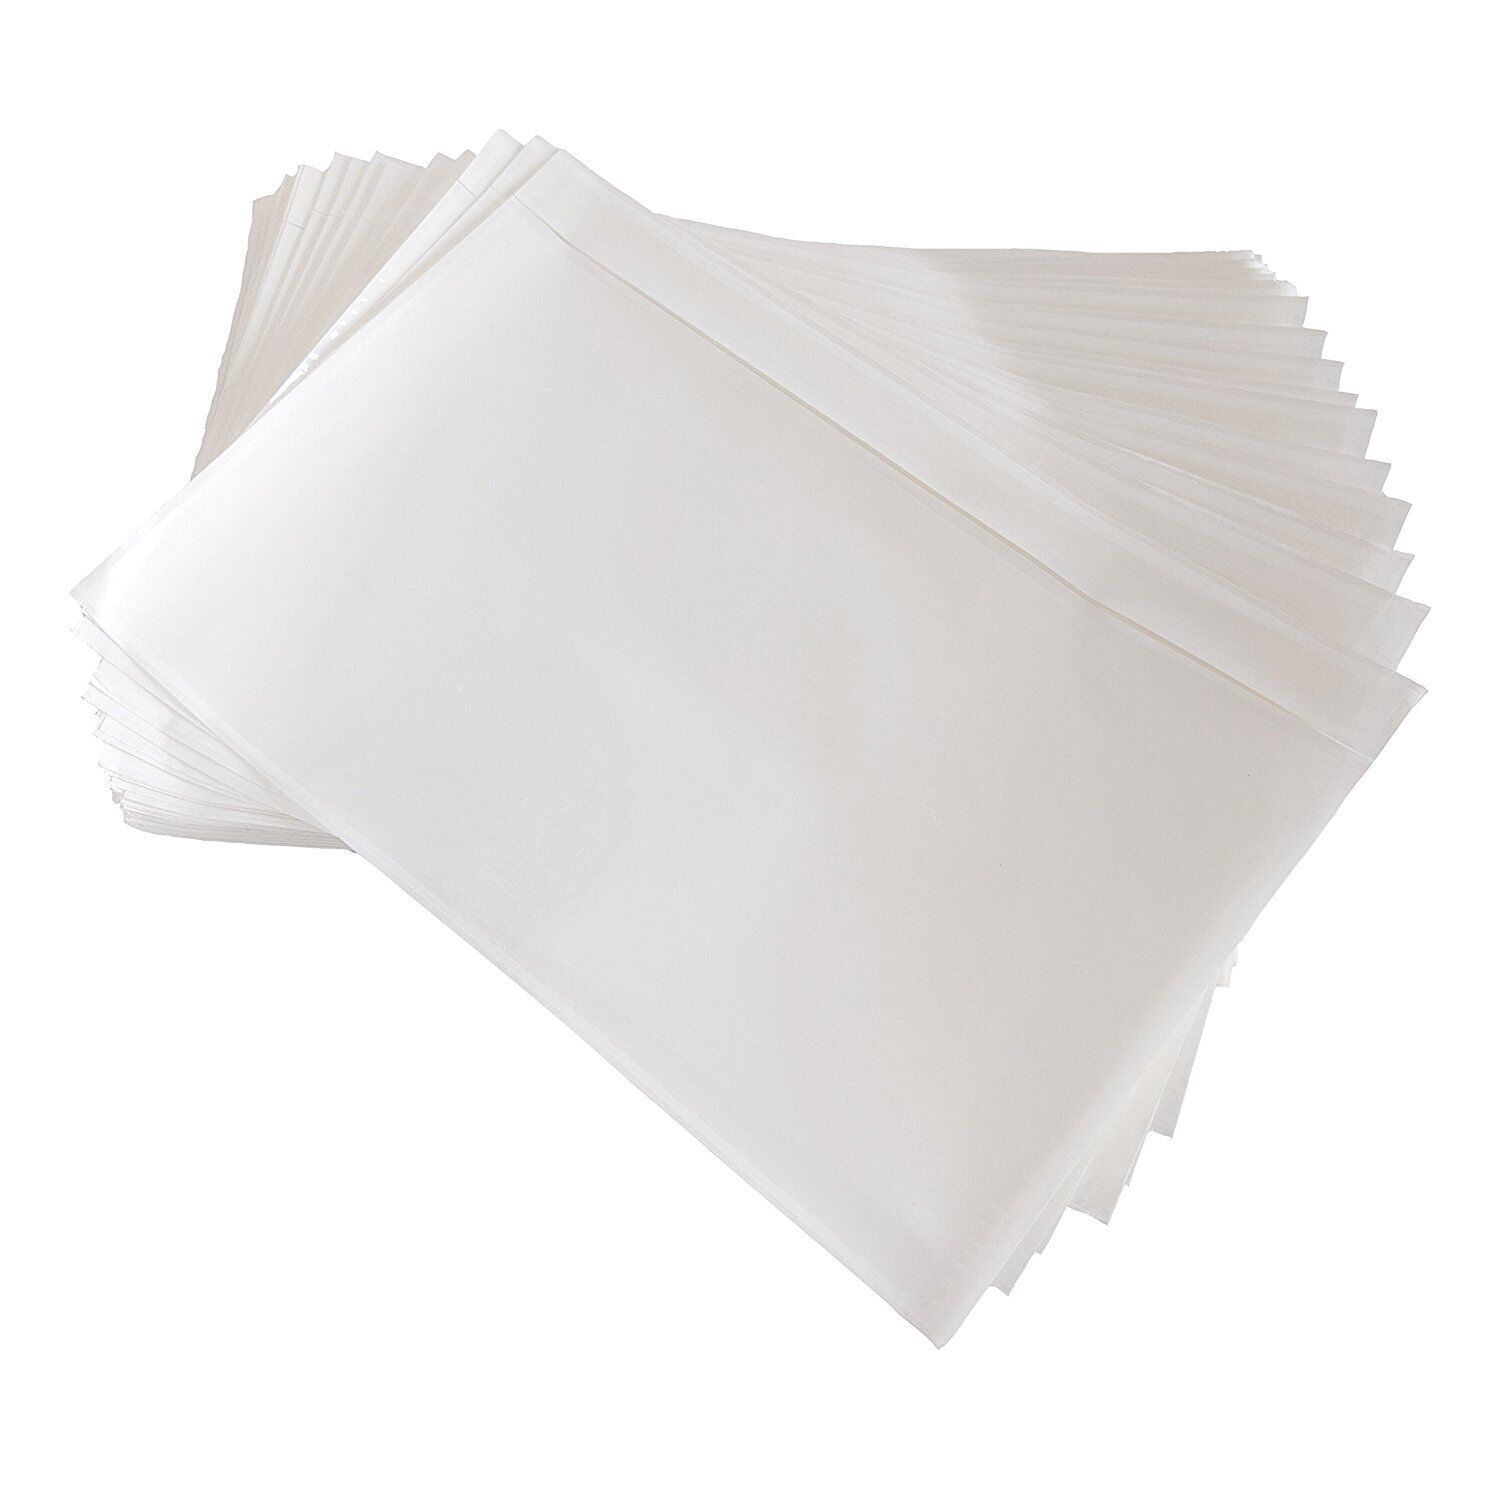 100 Packing List Pouches 7.5x5.5 Shipping Label Enclosed Envelopes Adhesive Unbranded Does not apply - фотография #2